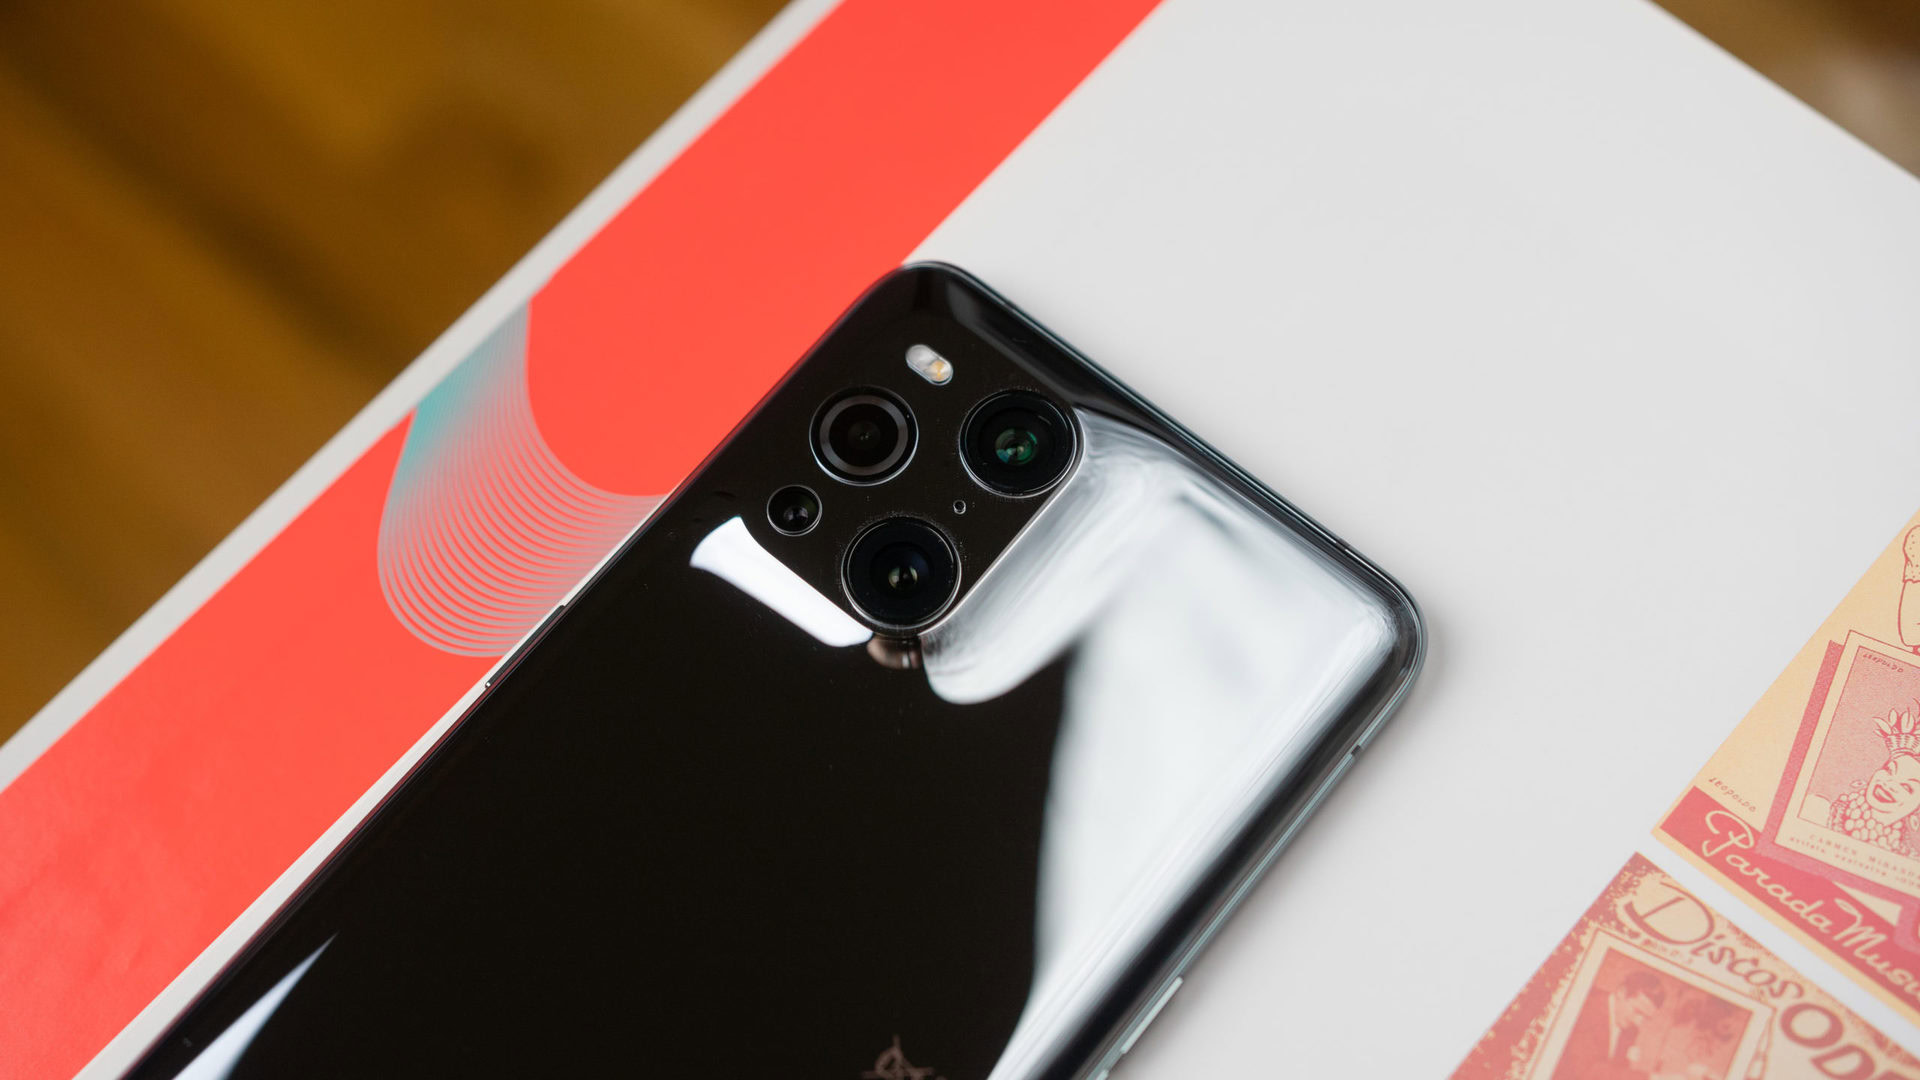 Oppo Find X3 Pro 5G camera bump with shiny reflections on the glossy back phone.